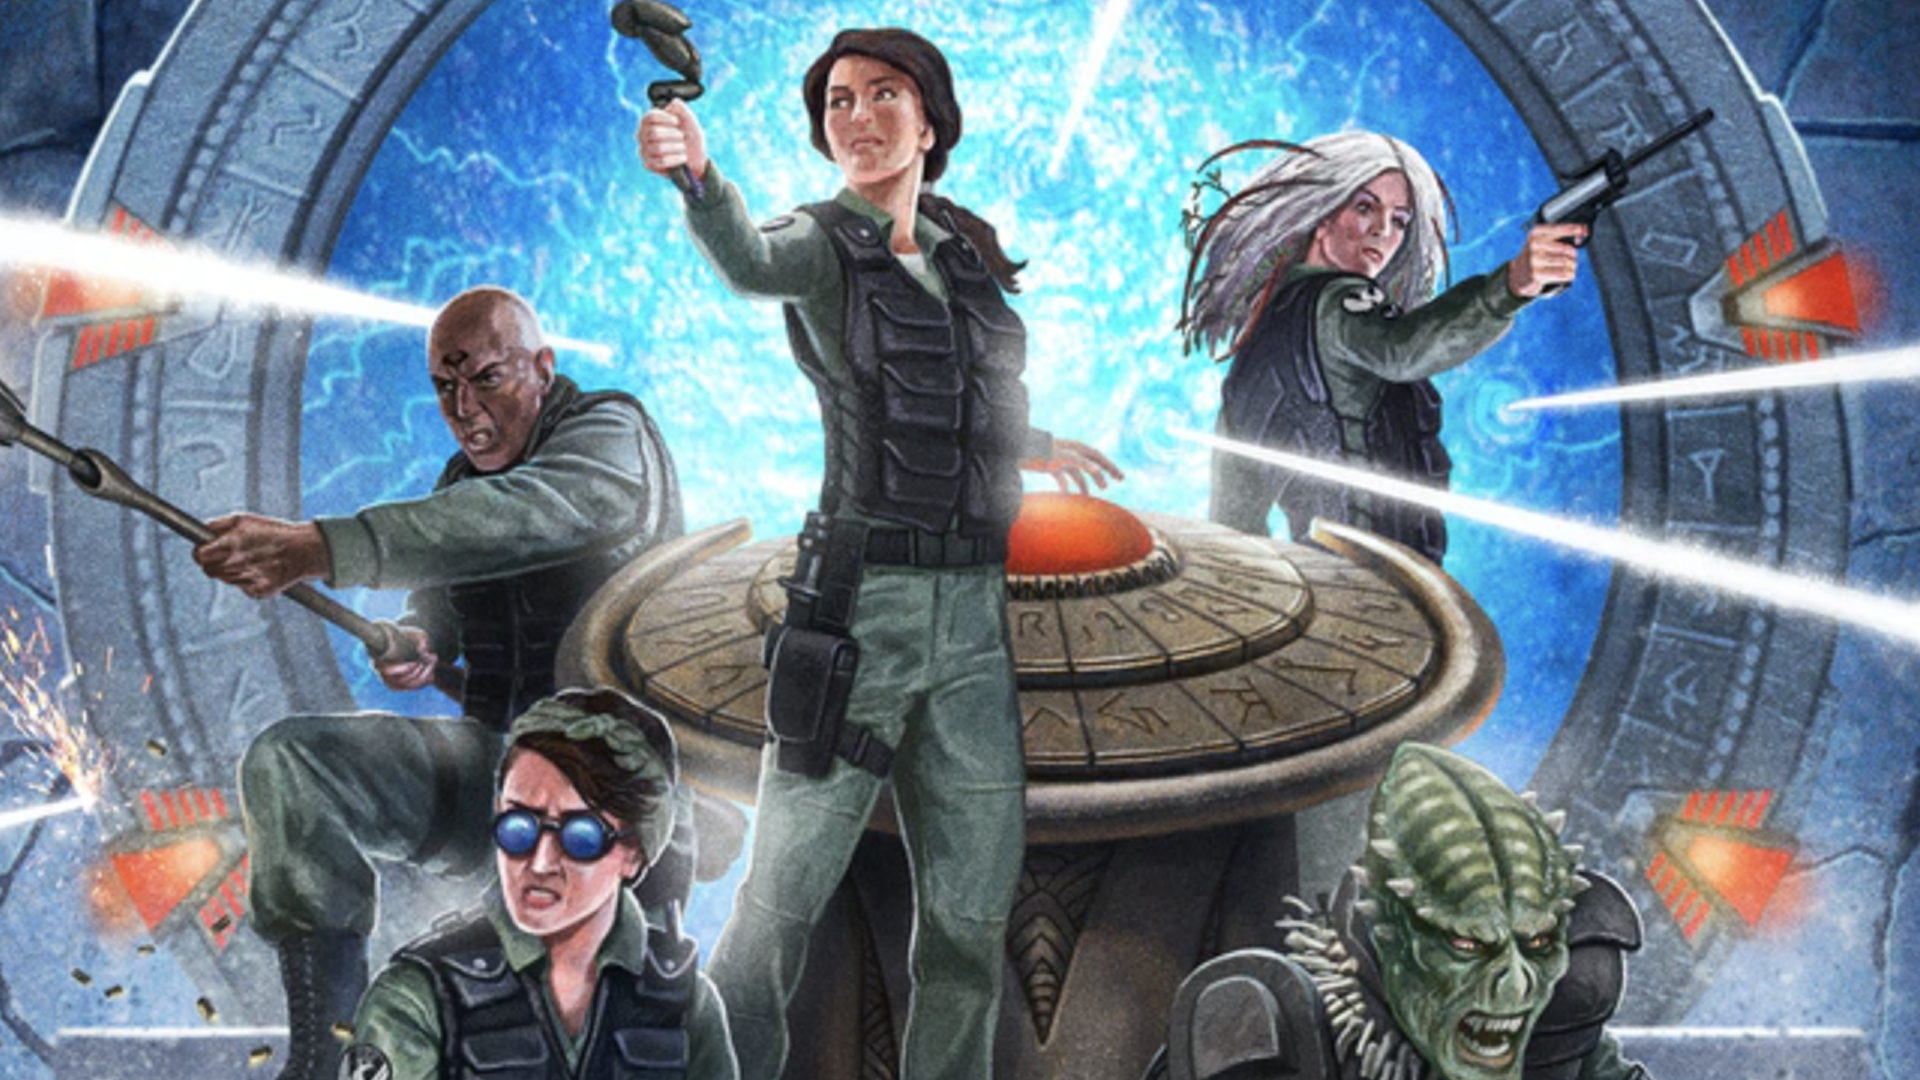 Stargate SG1 RPG lets you create your own season of the beloved scifi